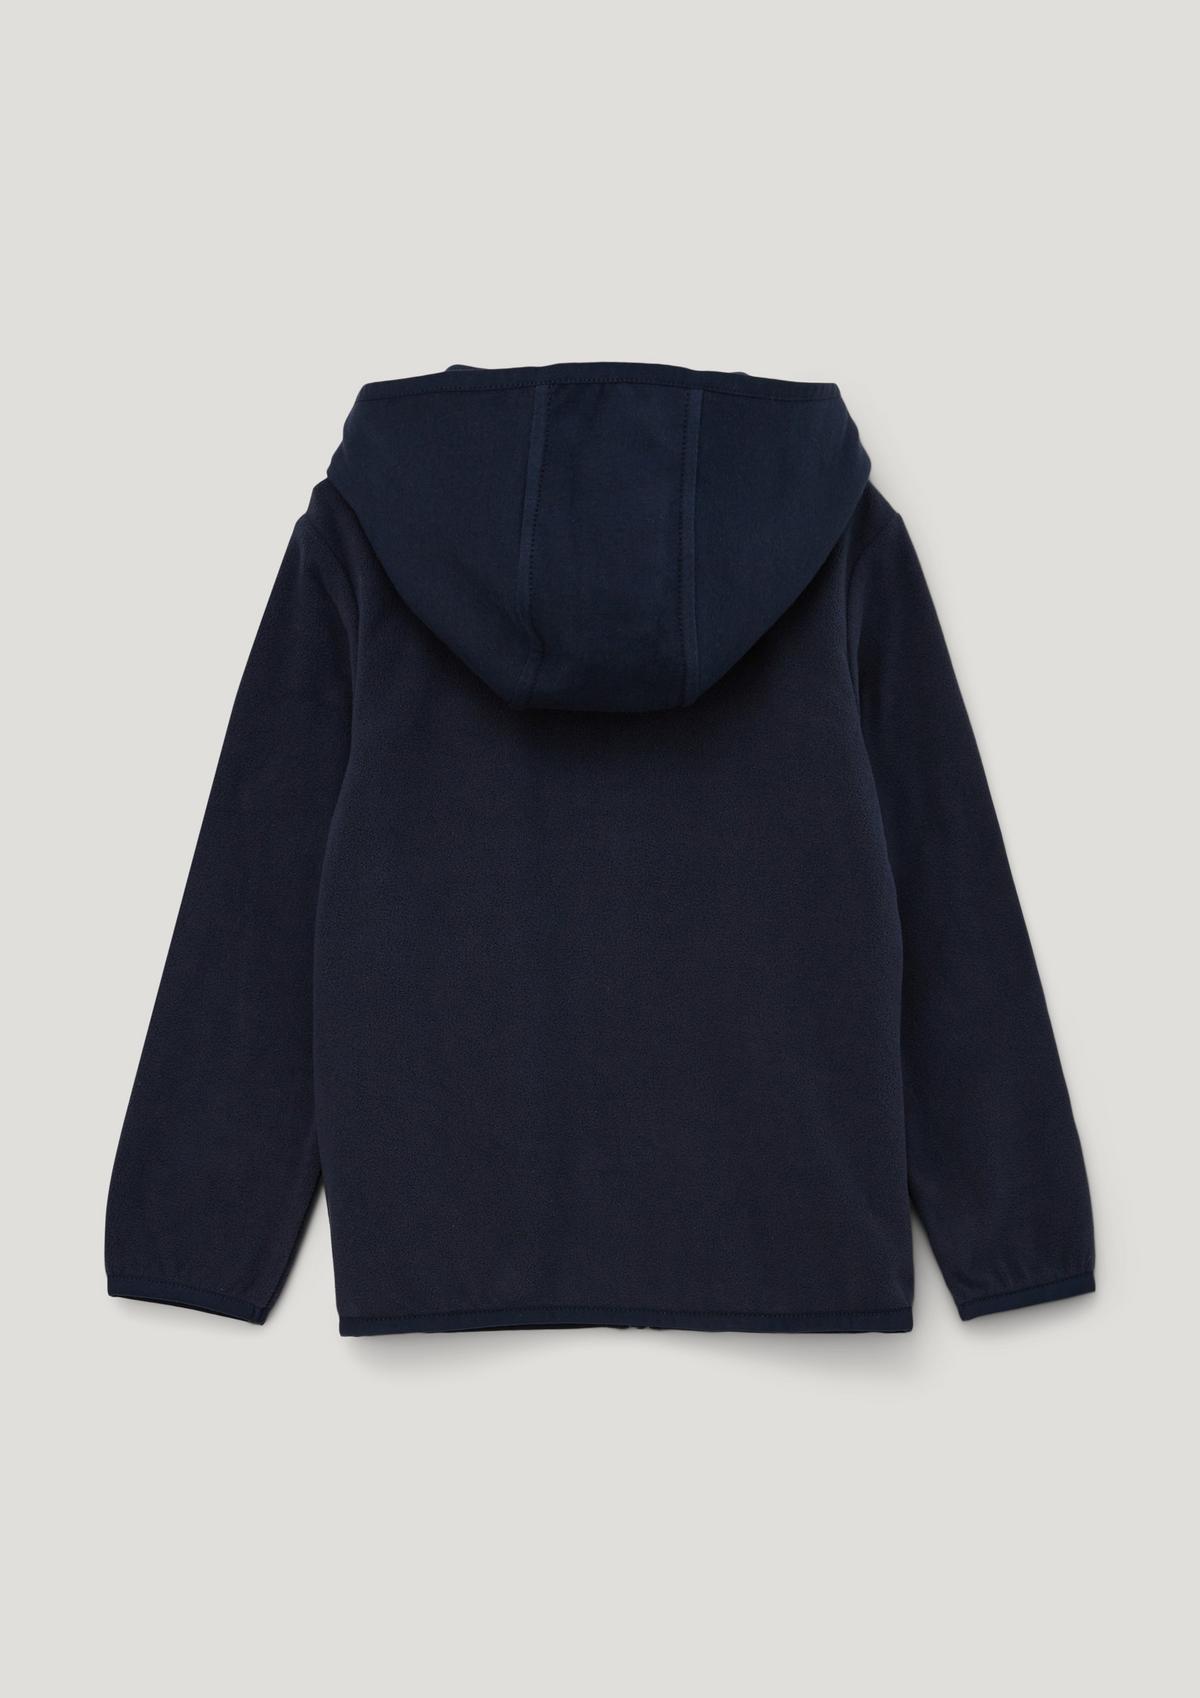 s.Oliver Sweatshirt jacket with a breast pocket